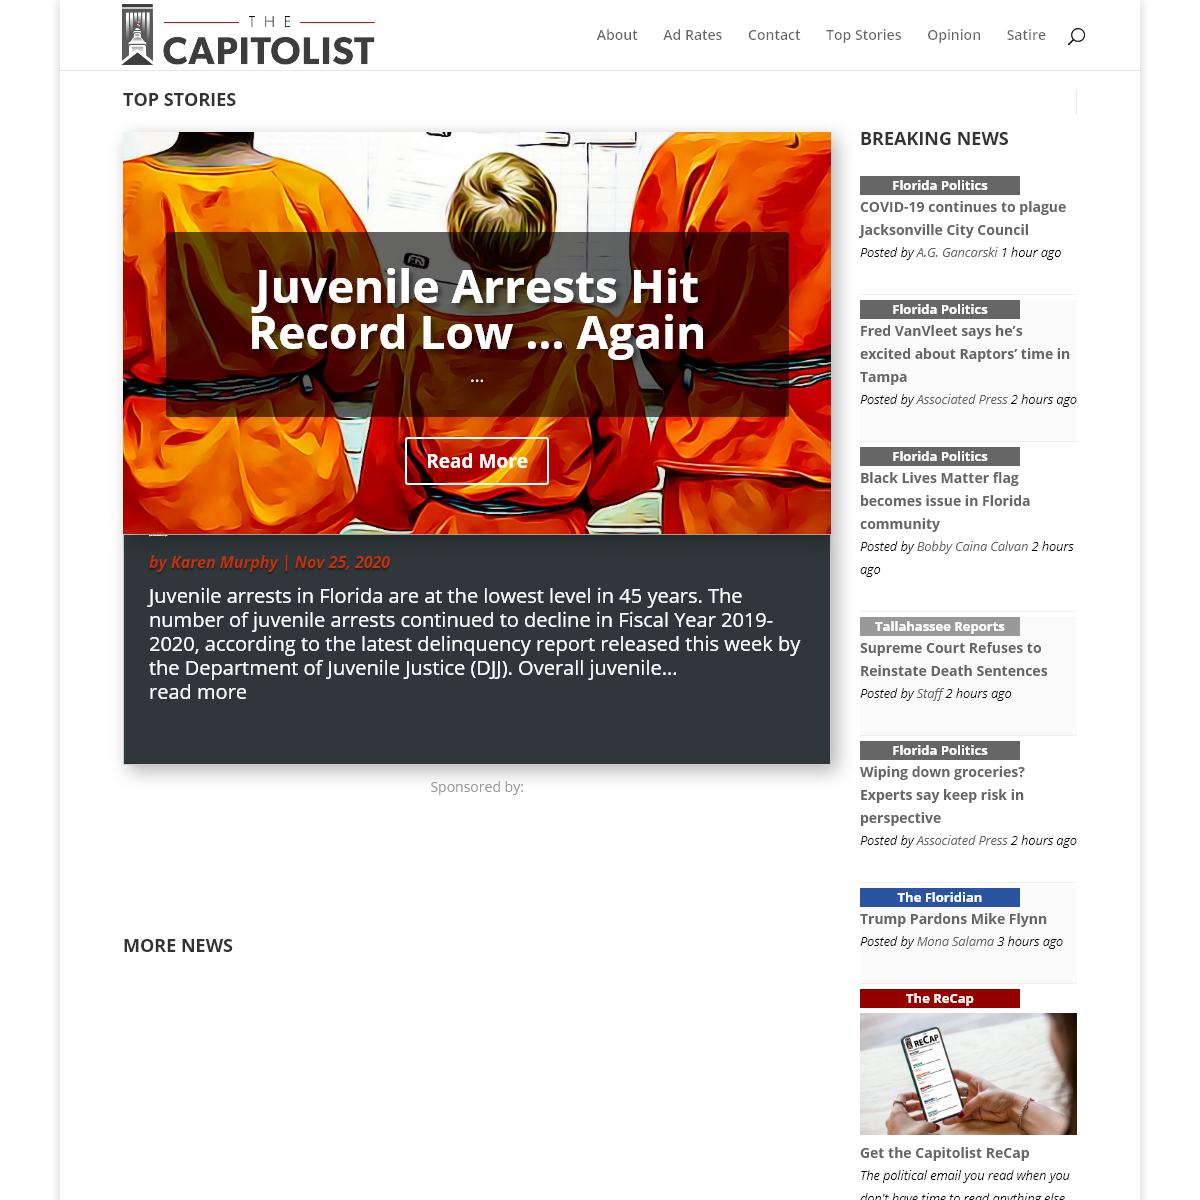 A complete backup of thecapitolist.com